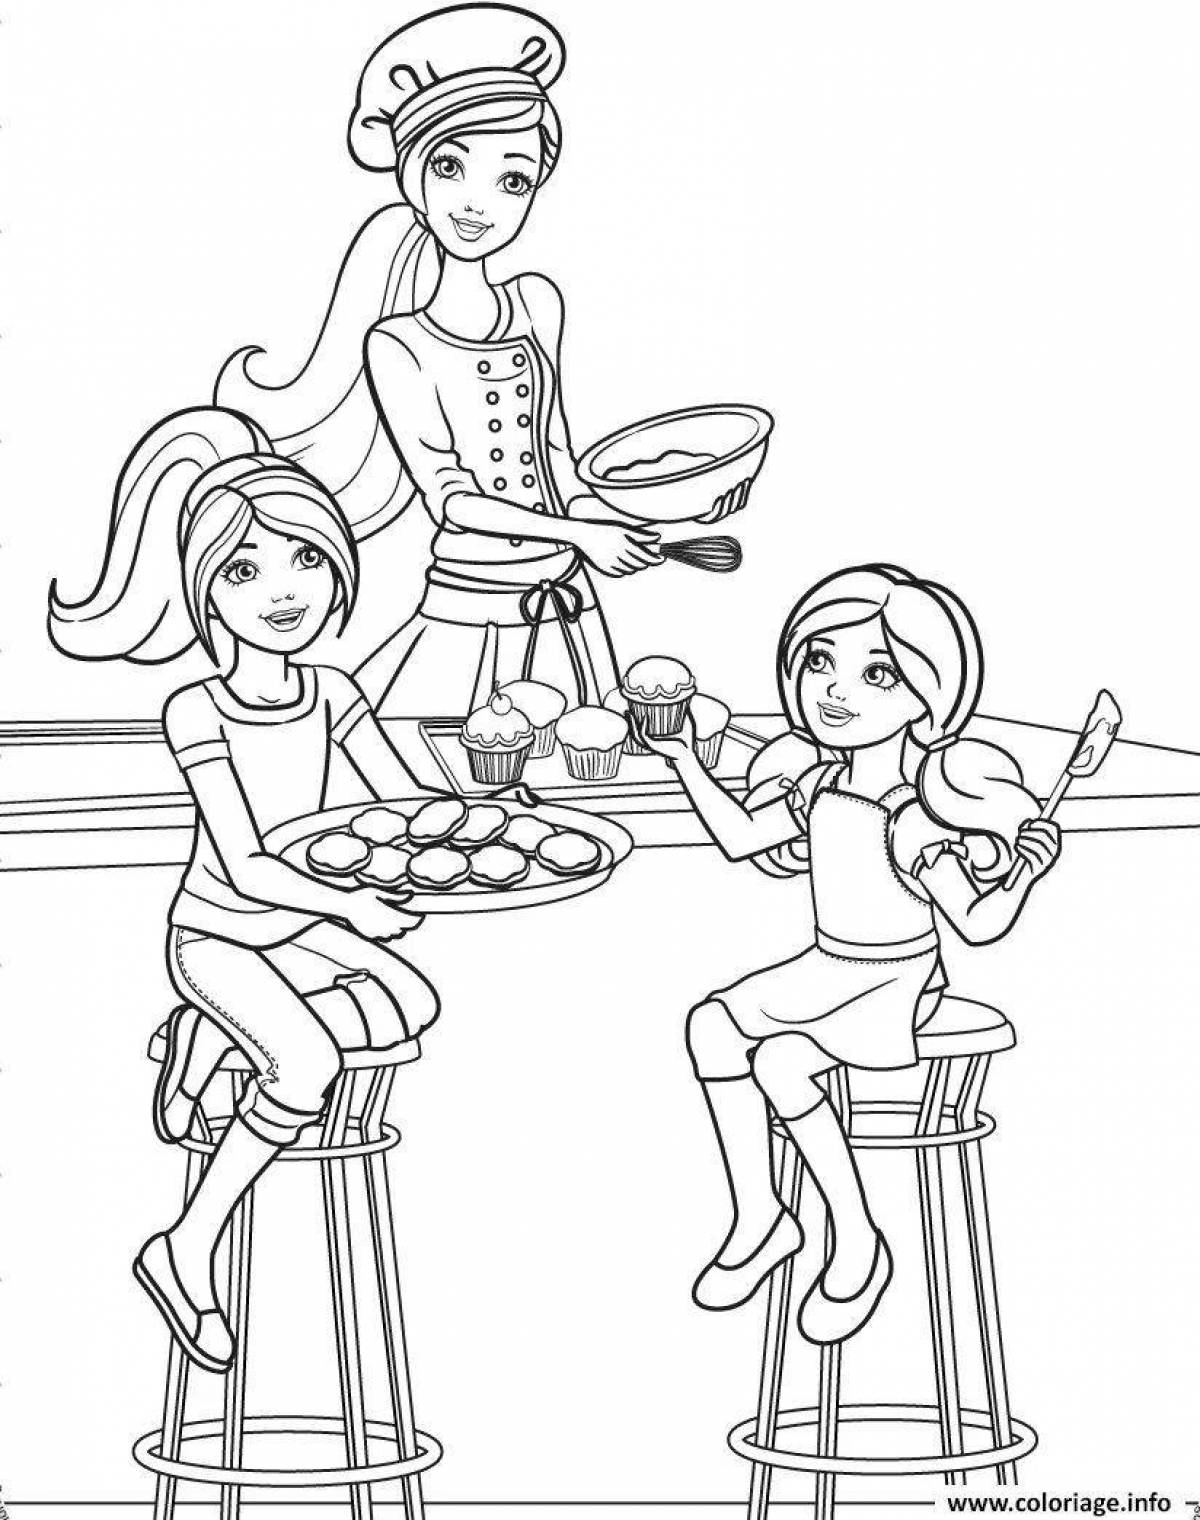 Humorous coloring book Barbie with a kitten